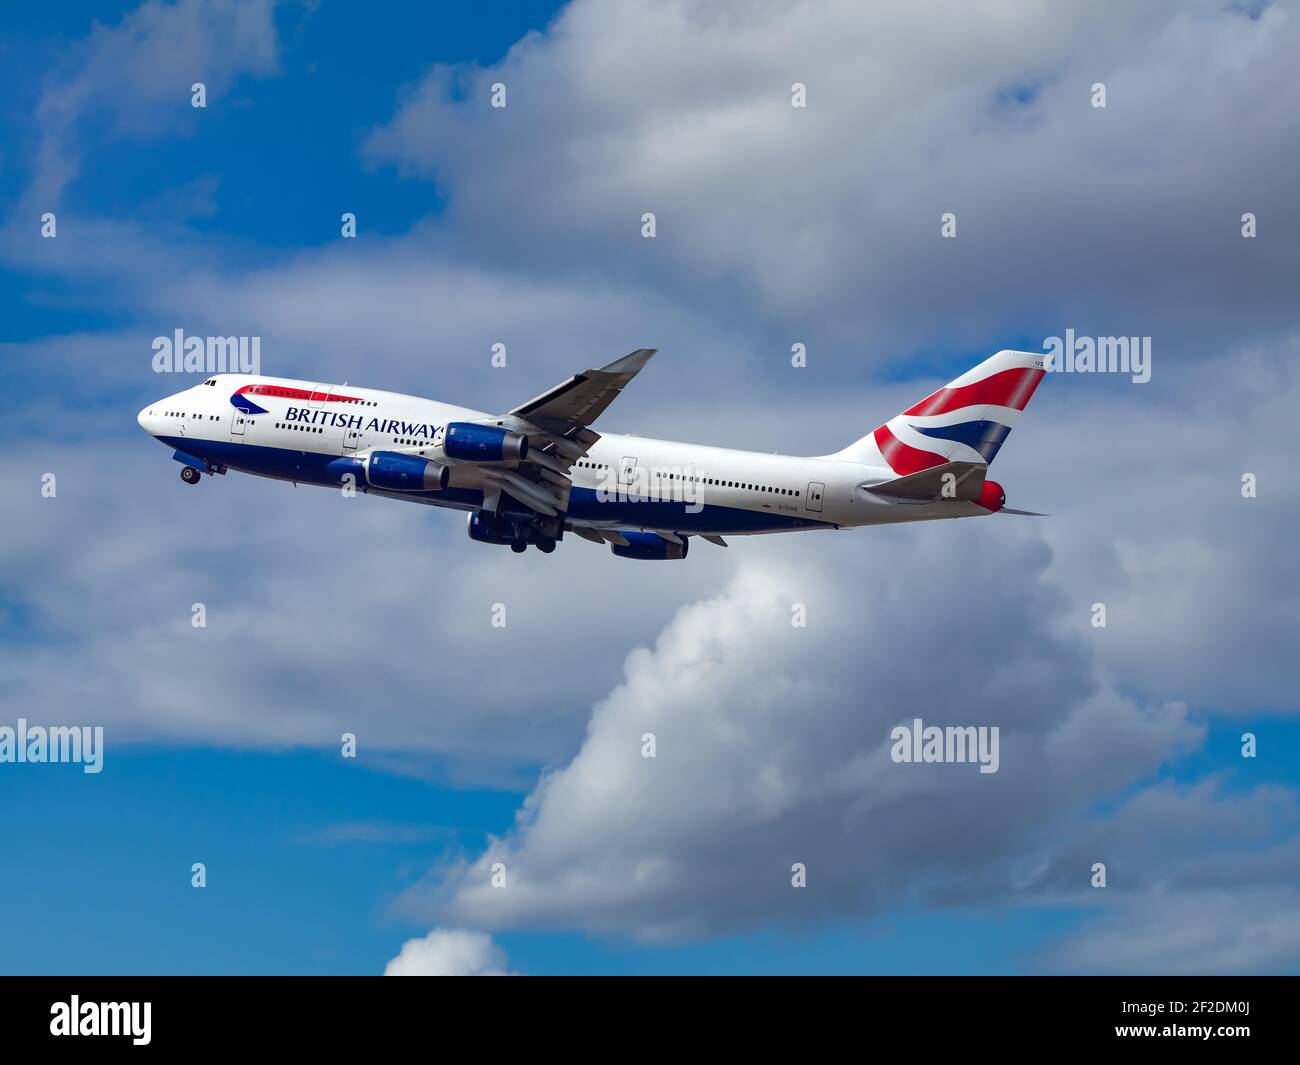 London, UK, August 2019 - British Airways Boeing 747-400 Jumbo Jet Taking off with its Landing gear partially retracted on a sunny and contrasty day. Stock Photo